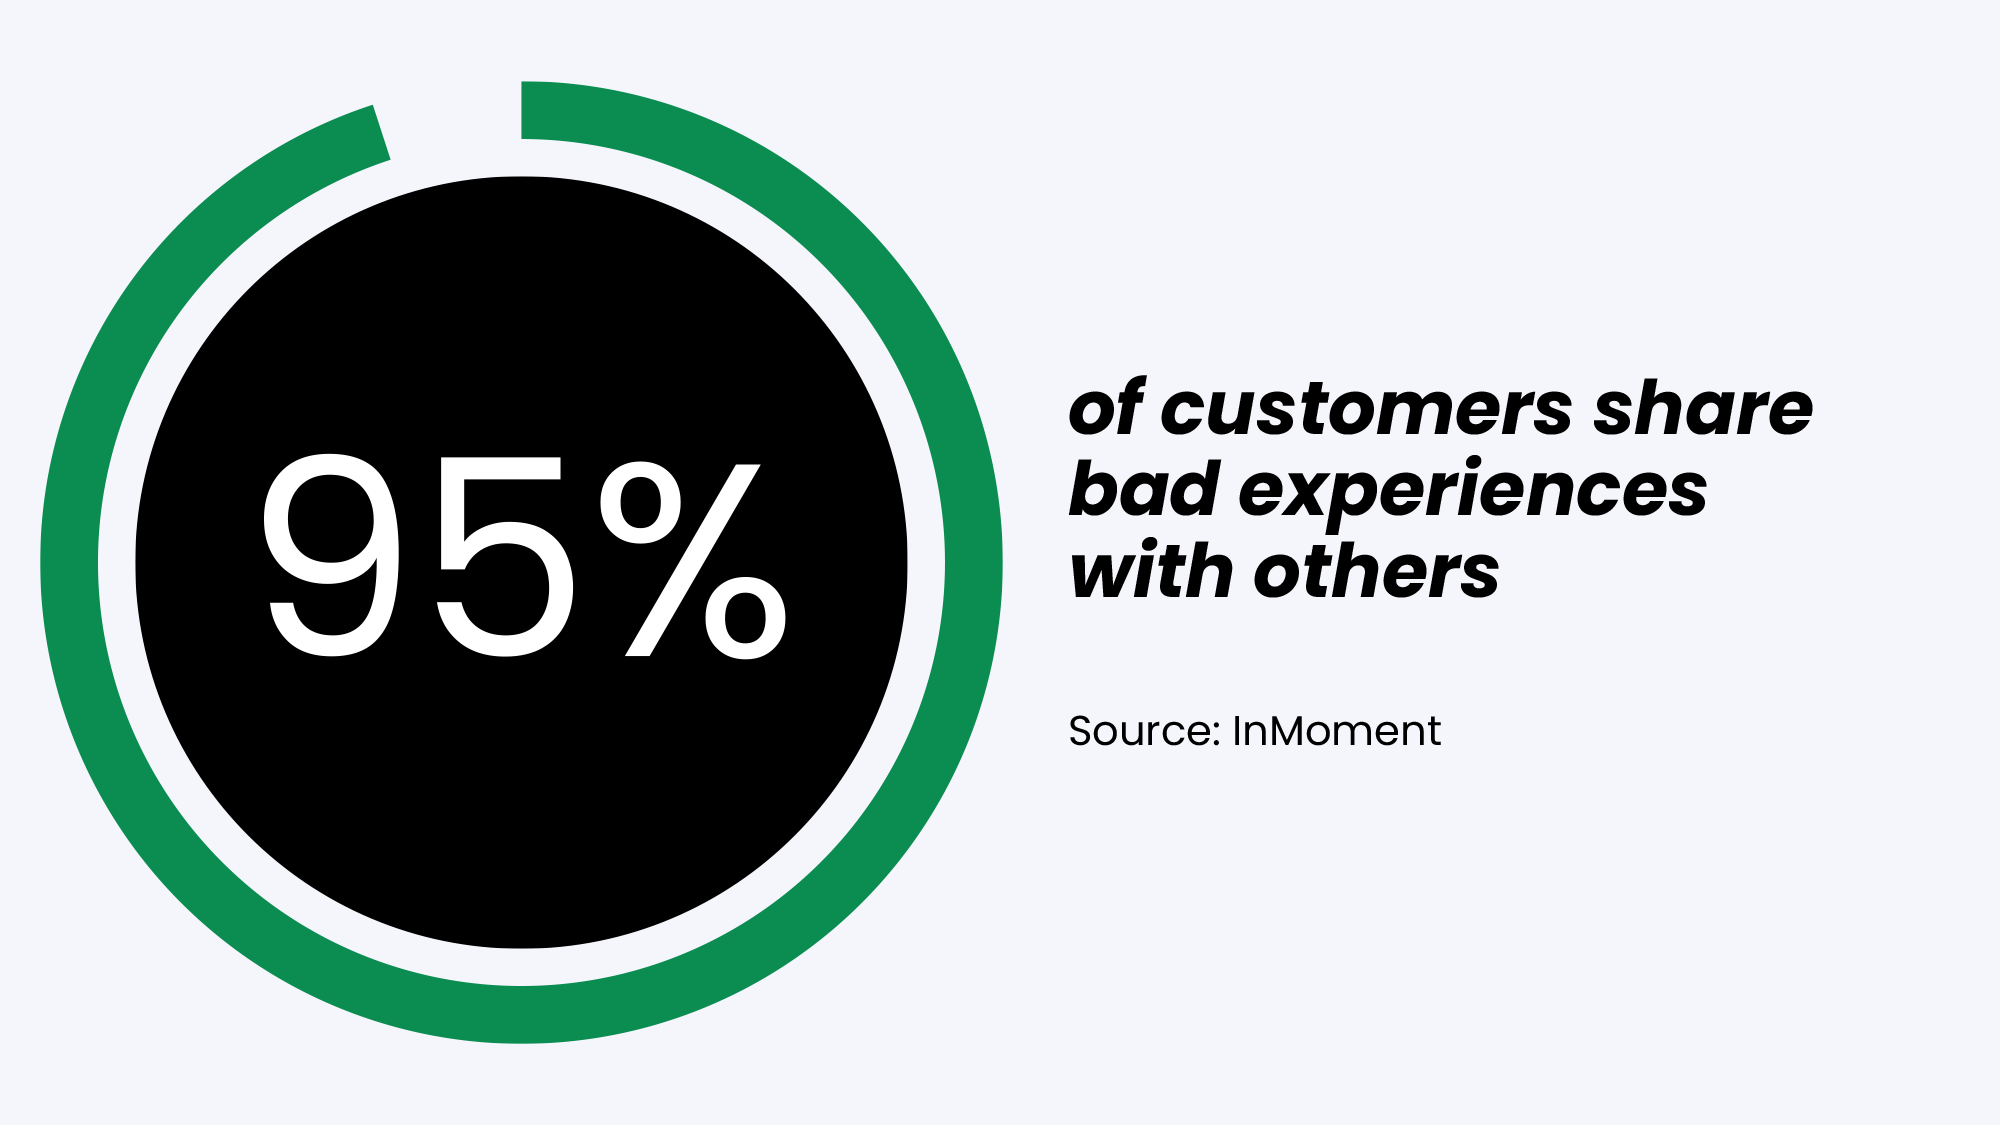 95% of customers share bad experiences with others